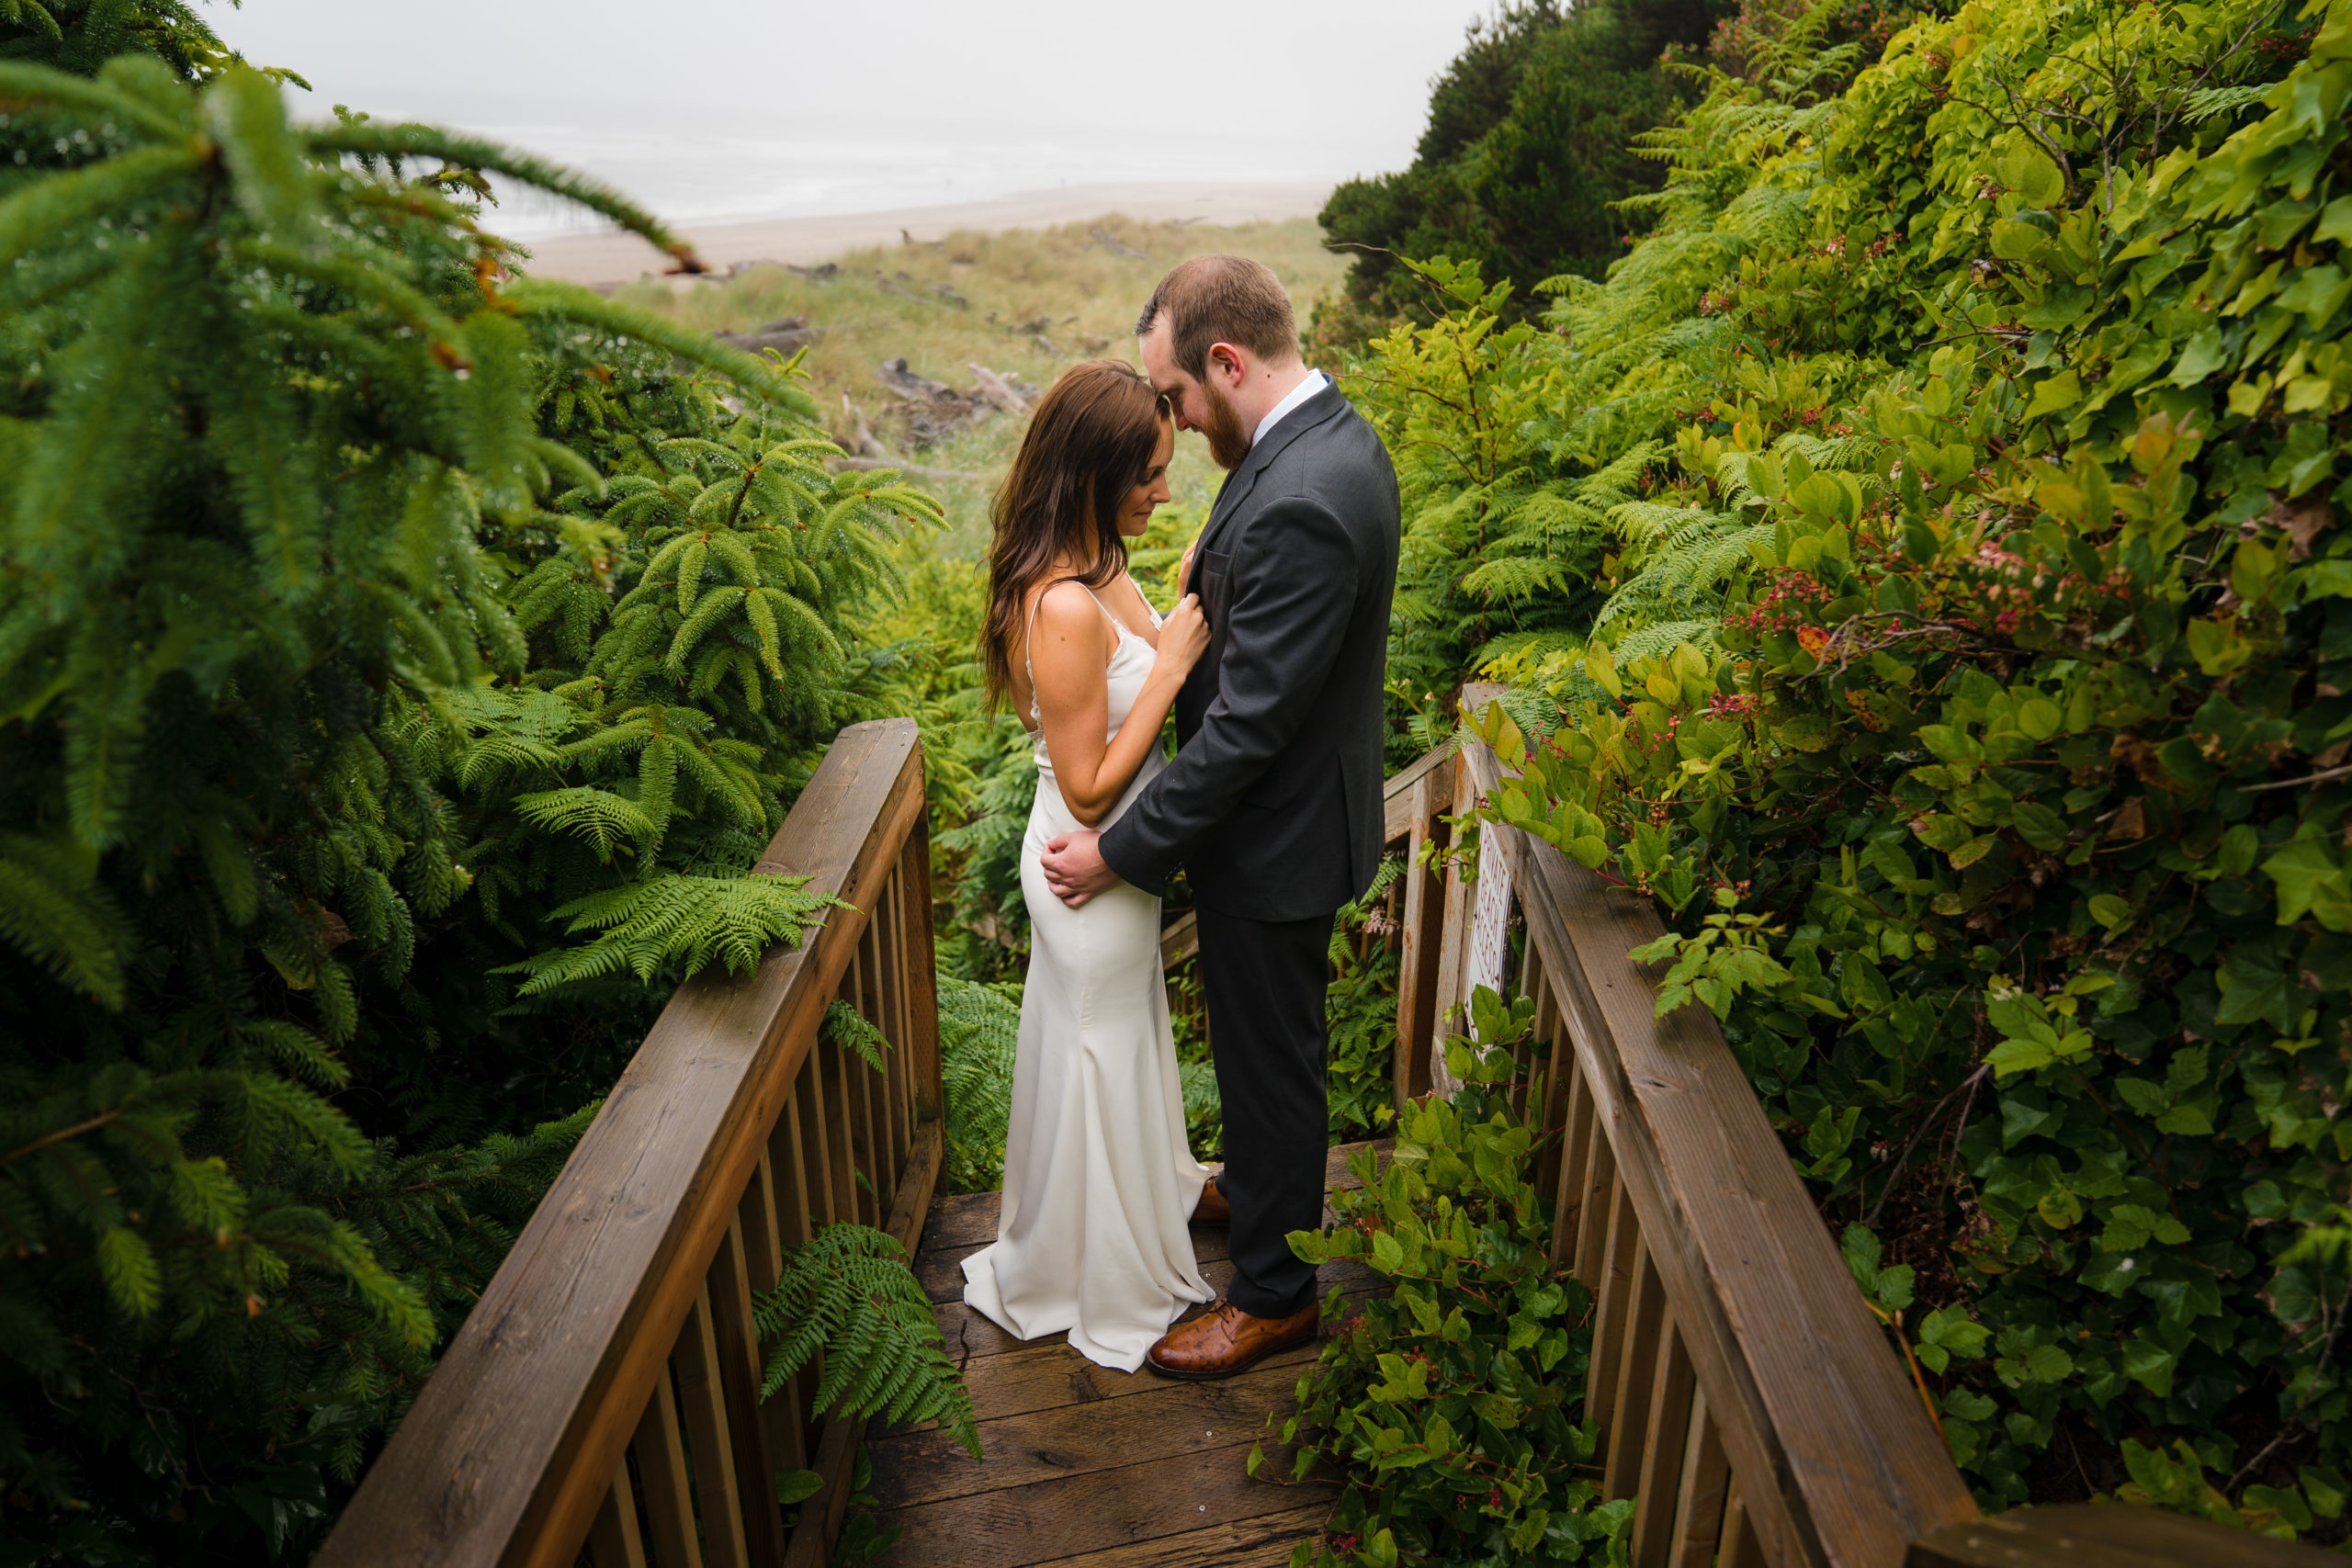 Portraits of the couple during their oregon coast elopement